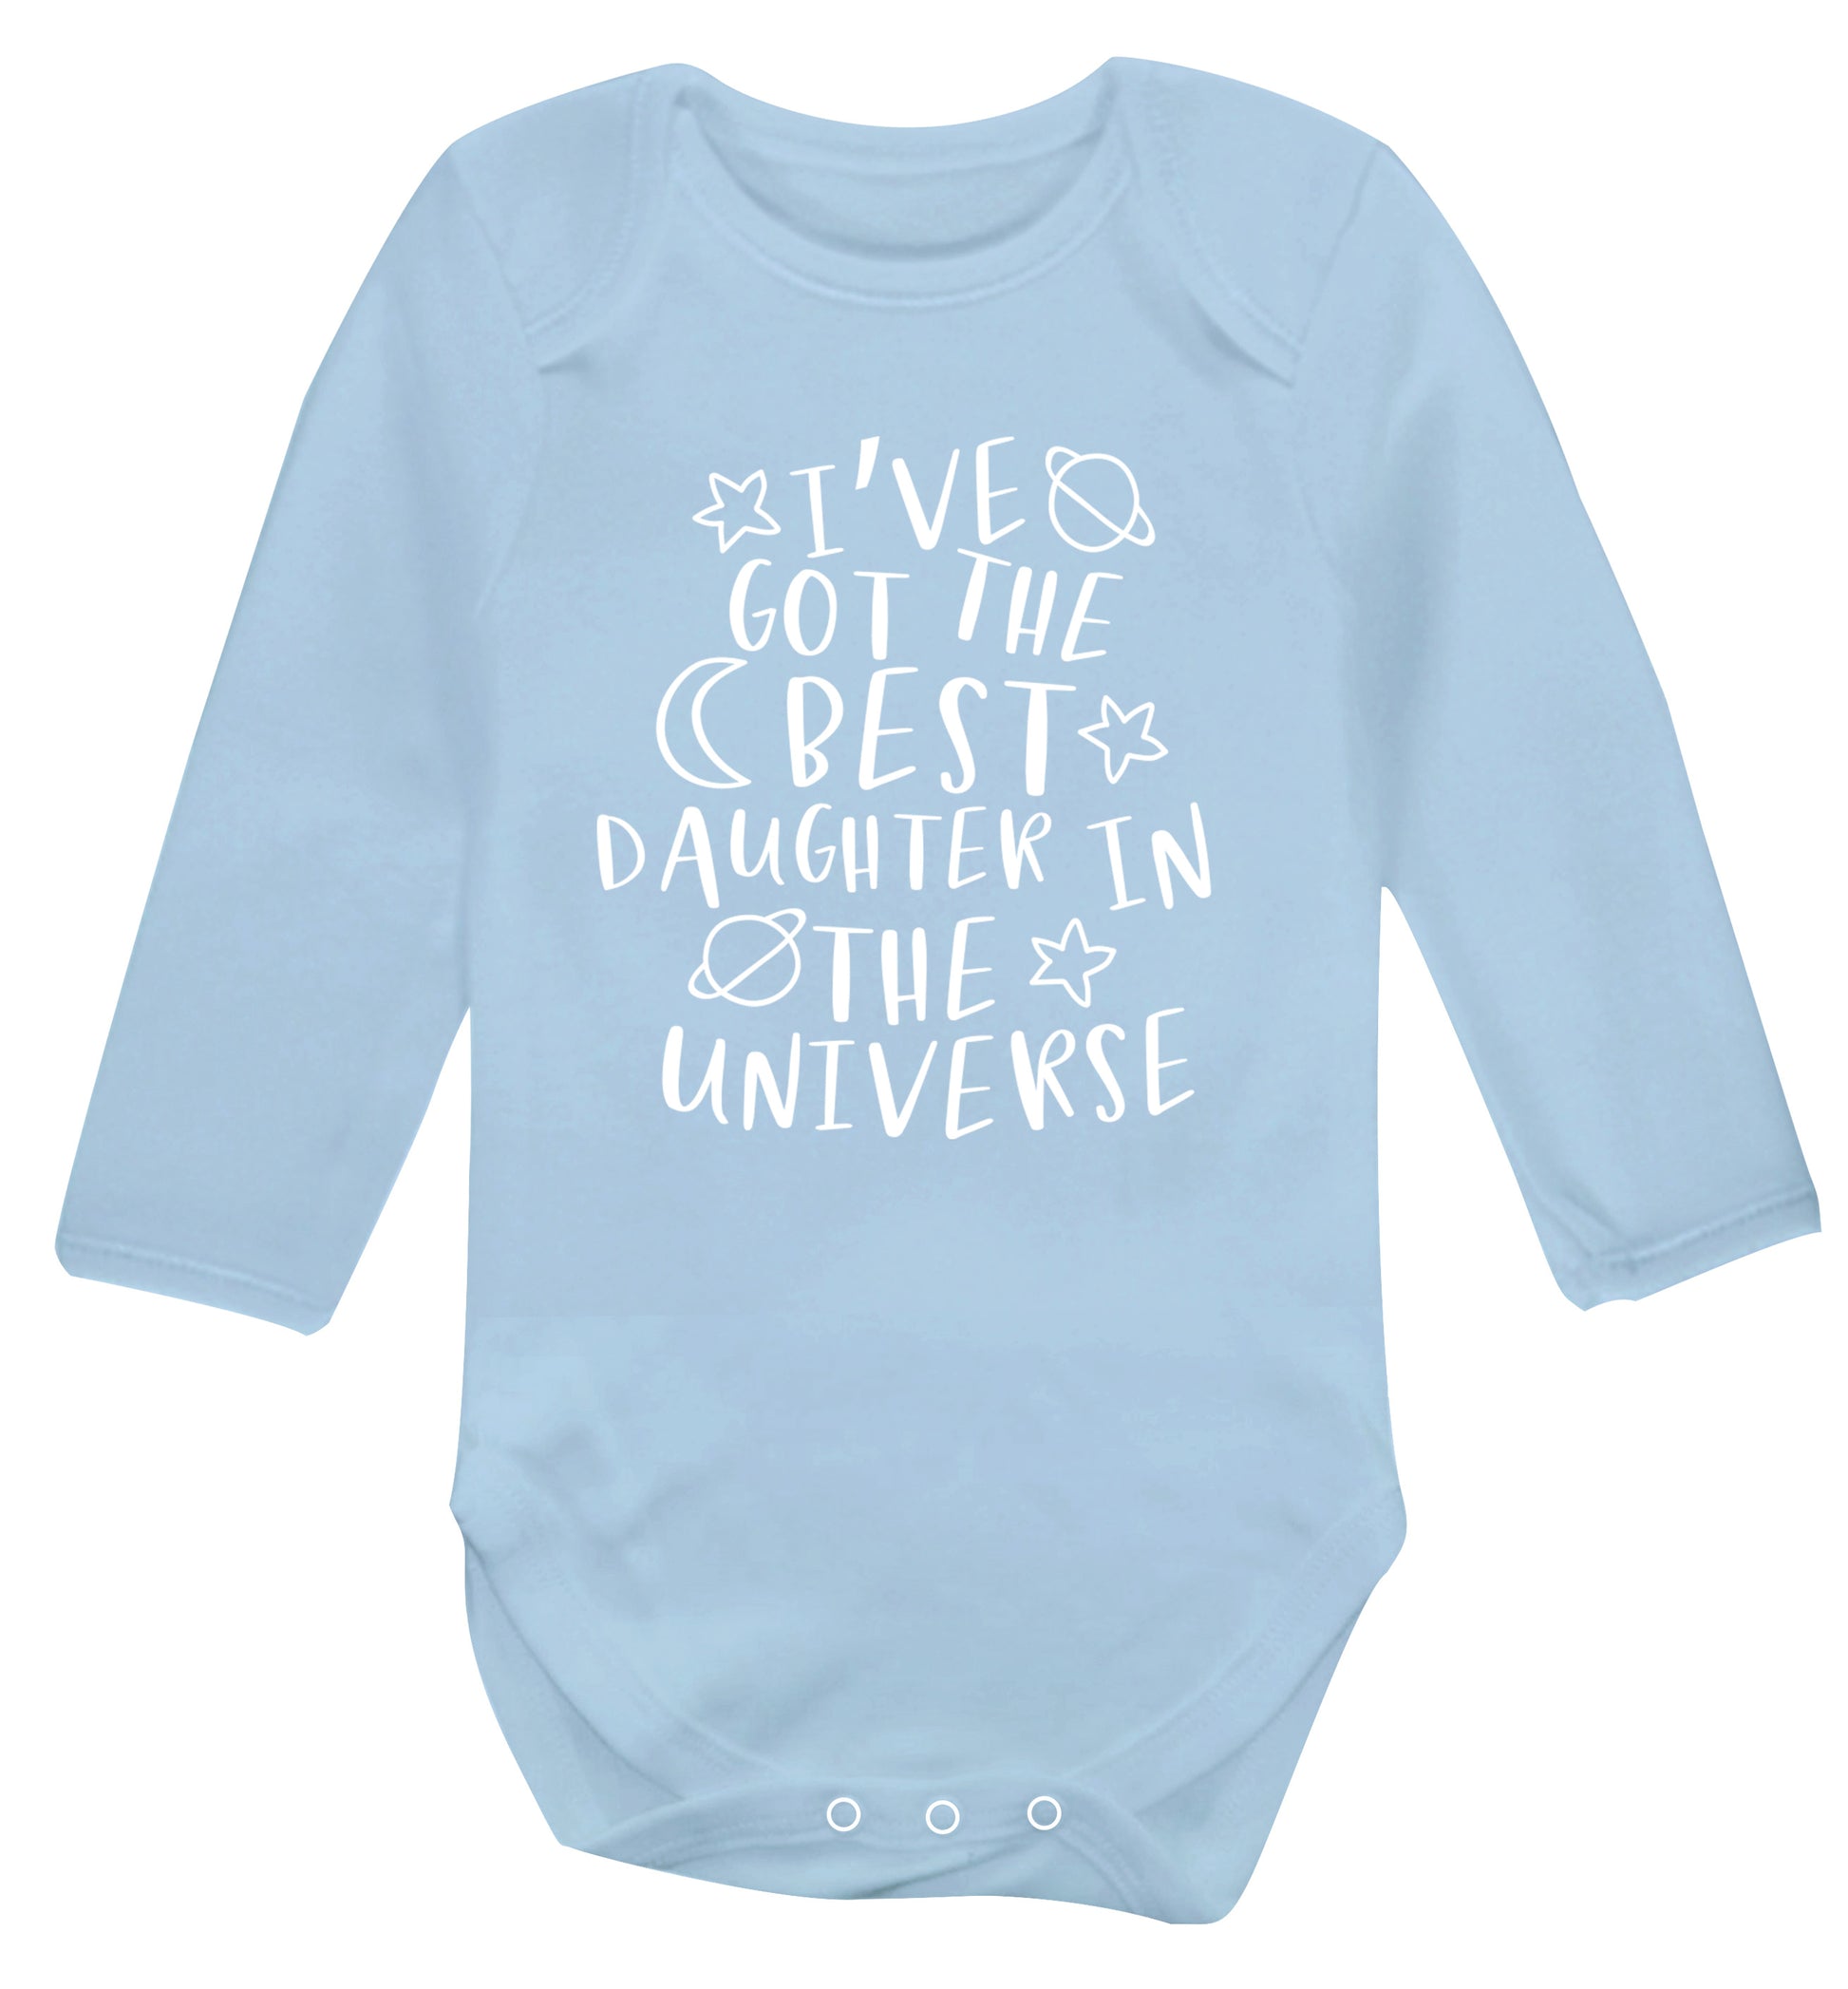 I've got the best daughter in the universe Baby Vest long sleeved pale blue 6-12 months